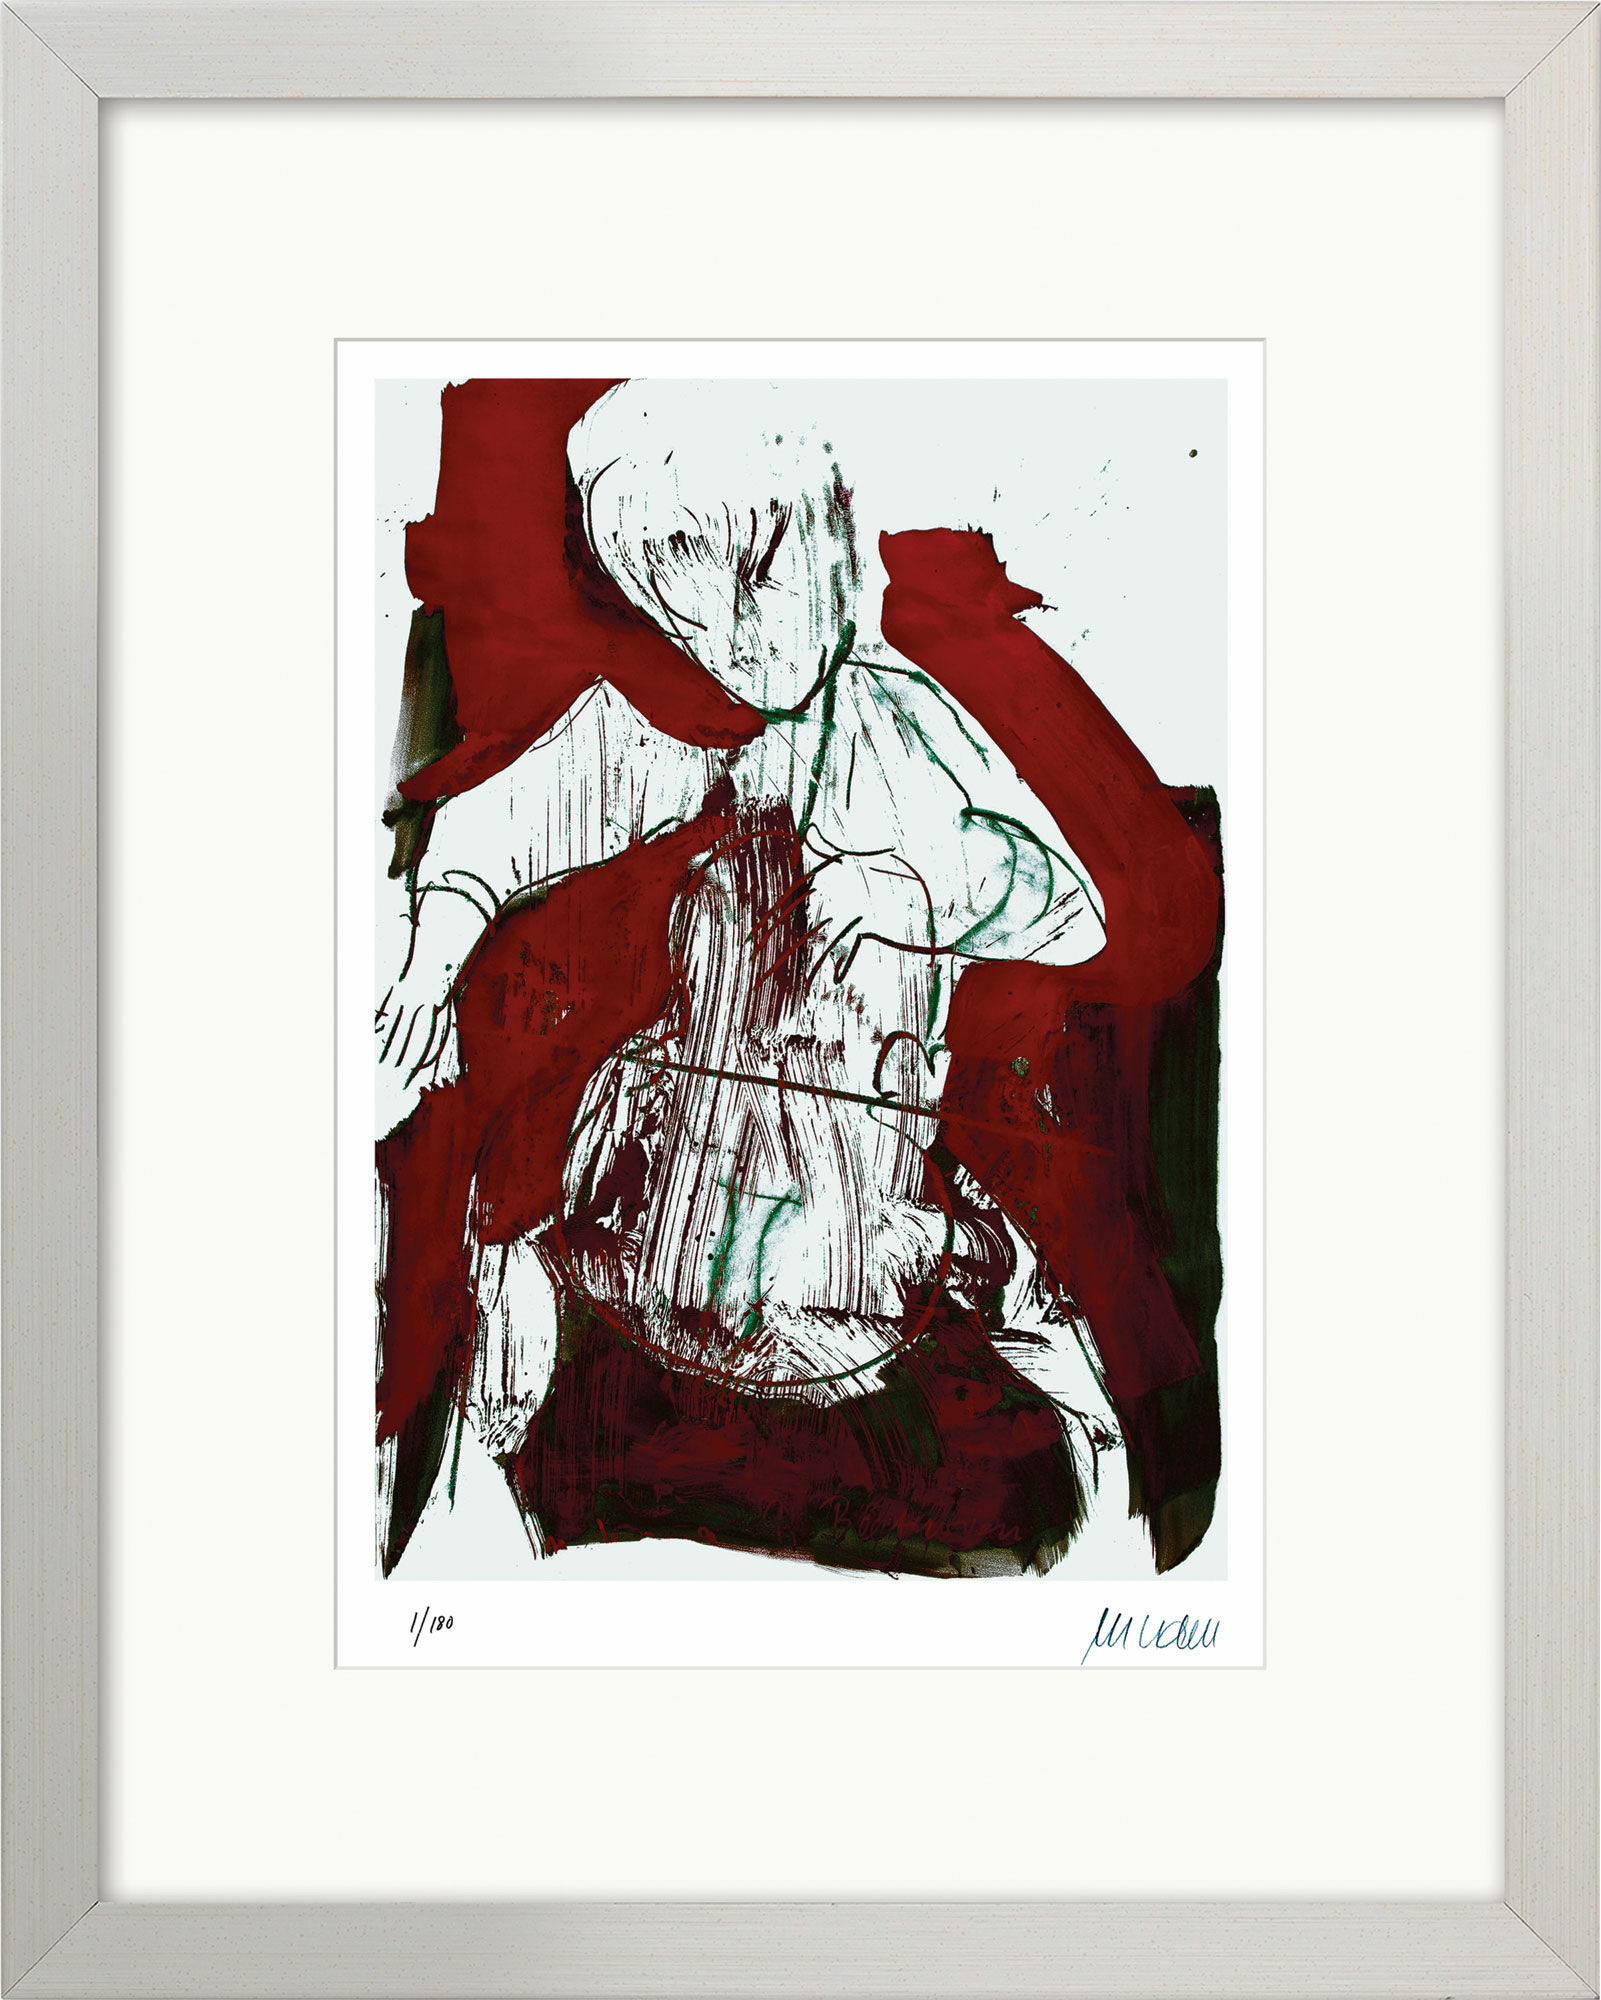 Picture "Cello Player" (2015), framed by Armin Mueller-Stahl